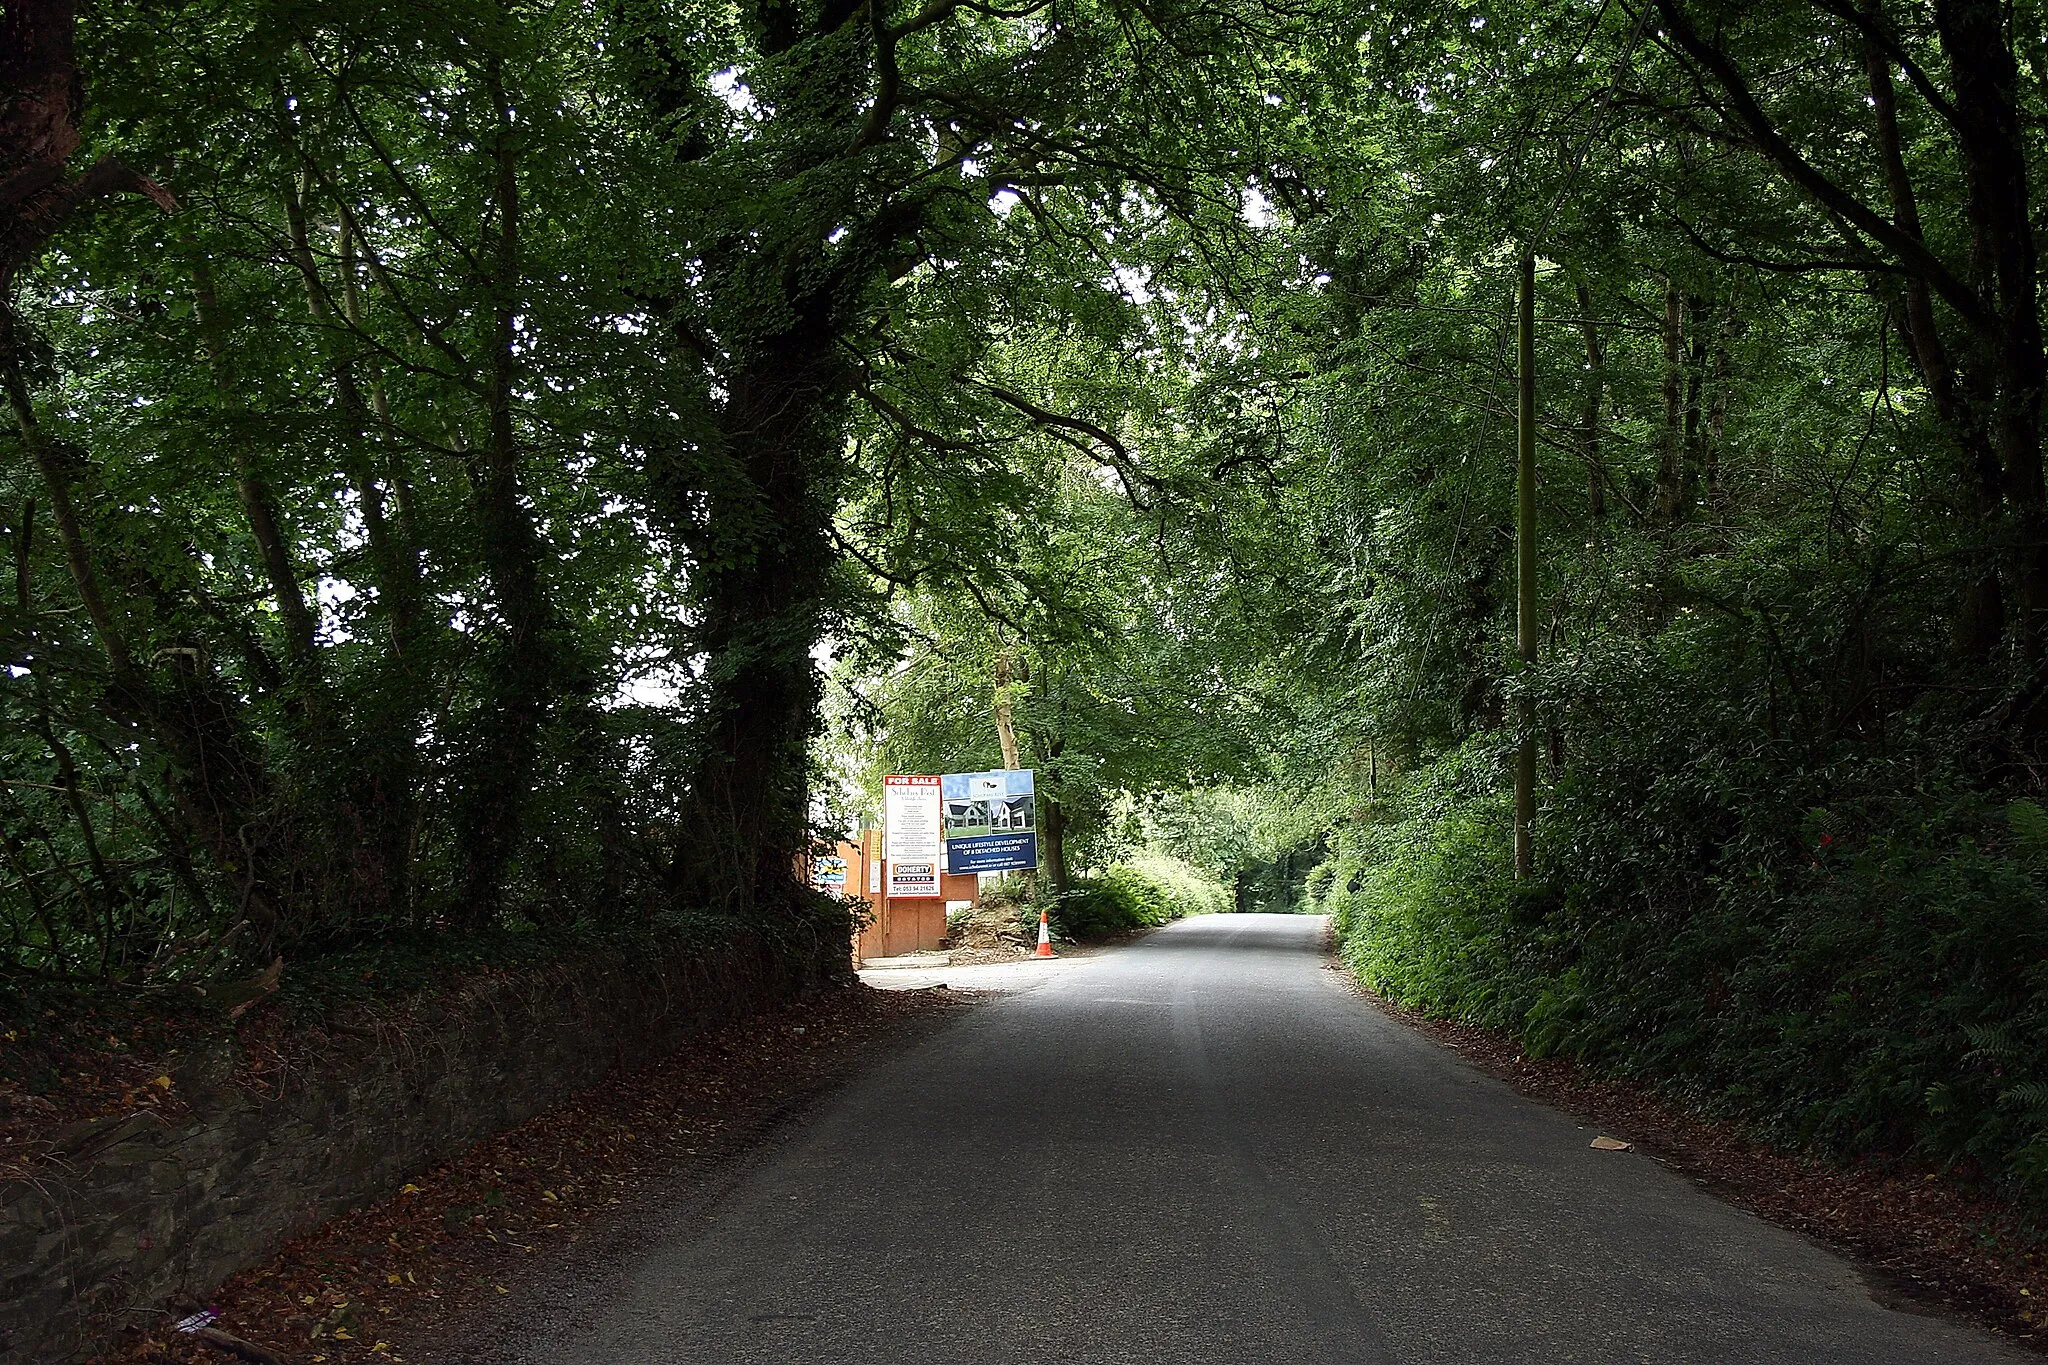 Photo showing: Hollyfort, County Wexford, Ireland. The road to Monaseed.